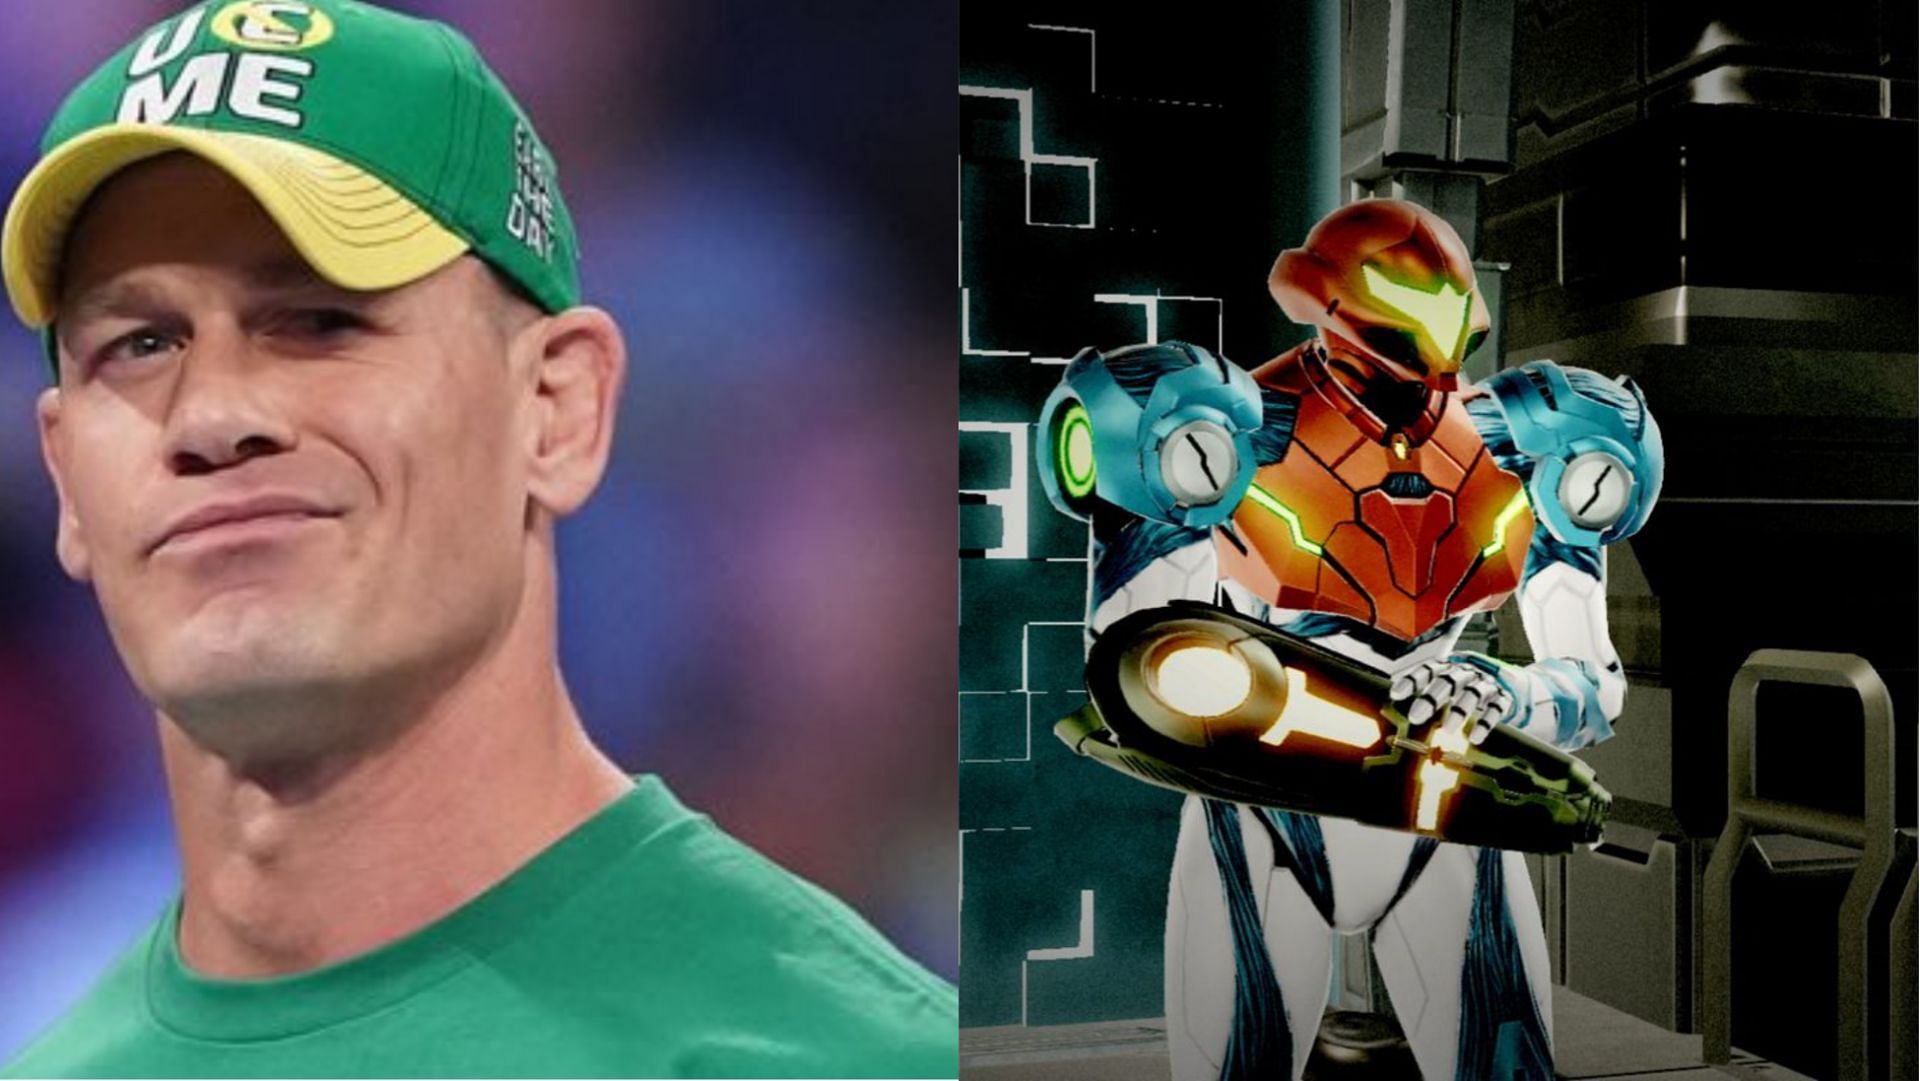 It has appeared that John Cena had a wish for a 2D Metroid game (Images via WWE, Nintendo)